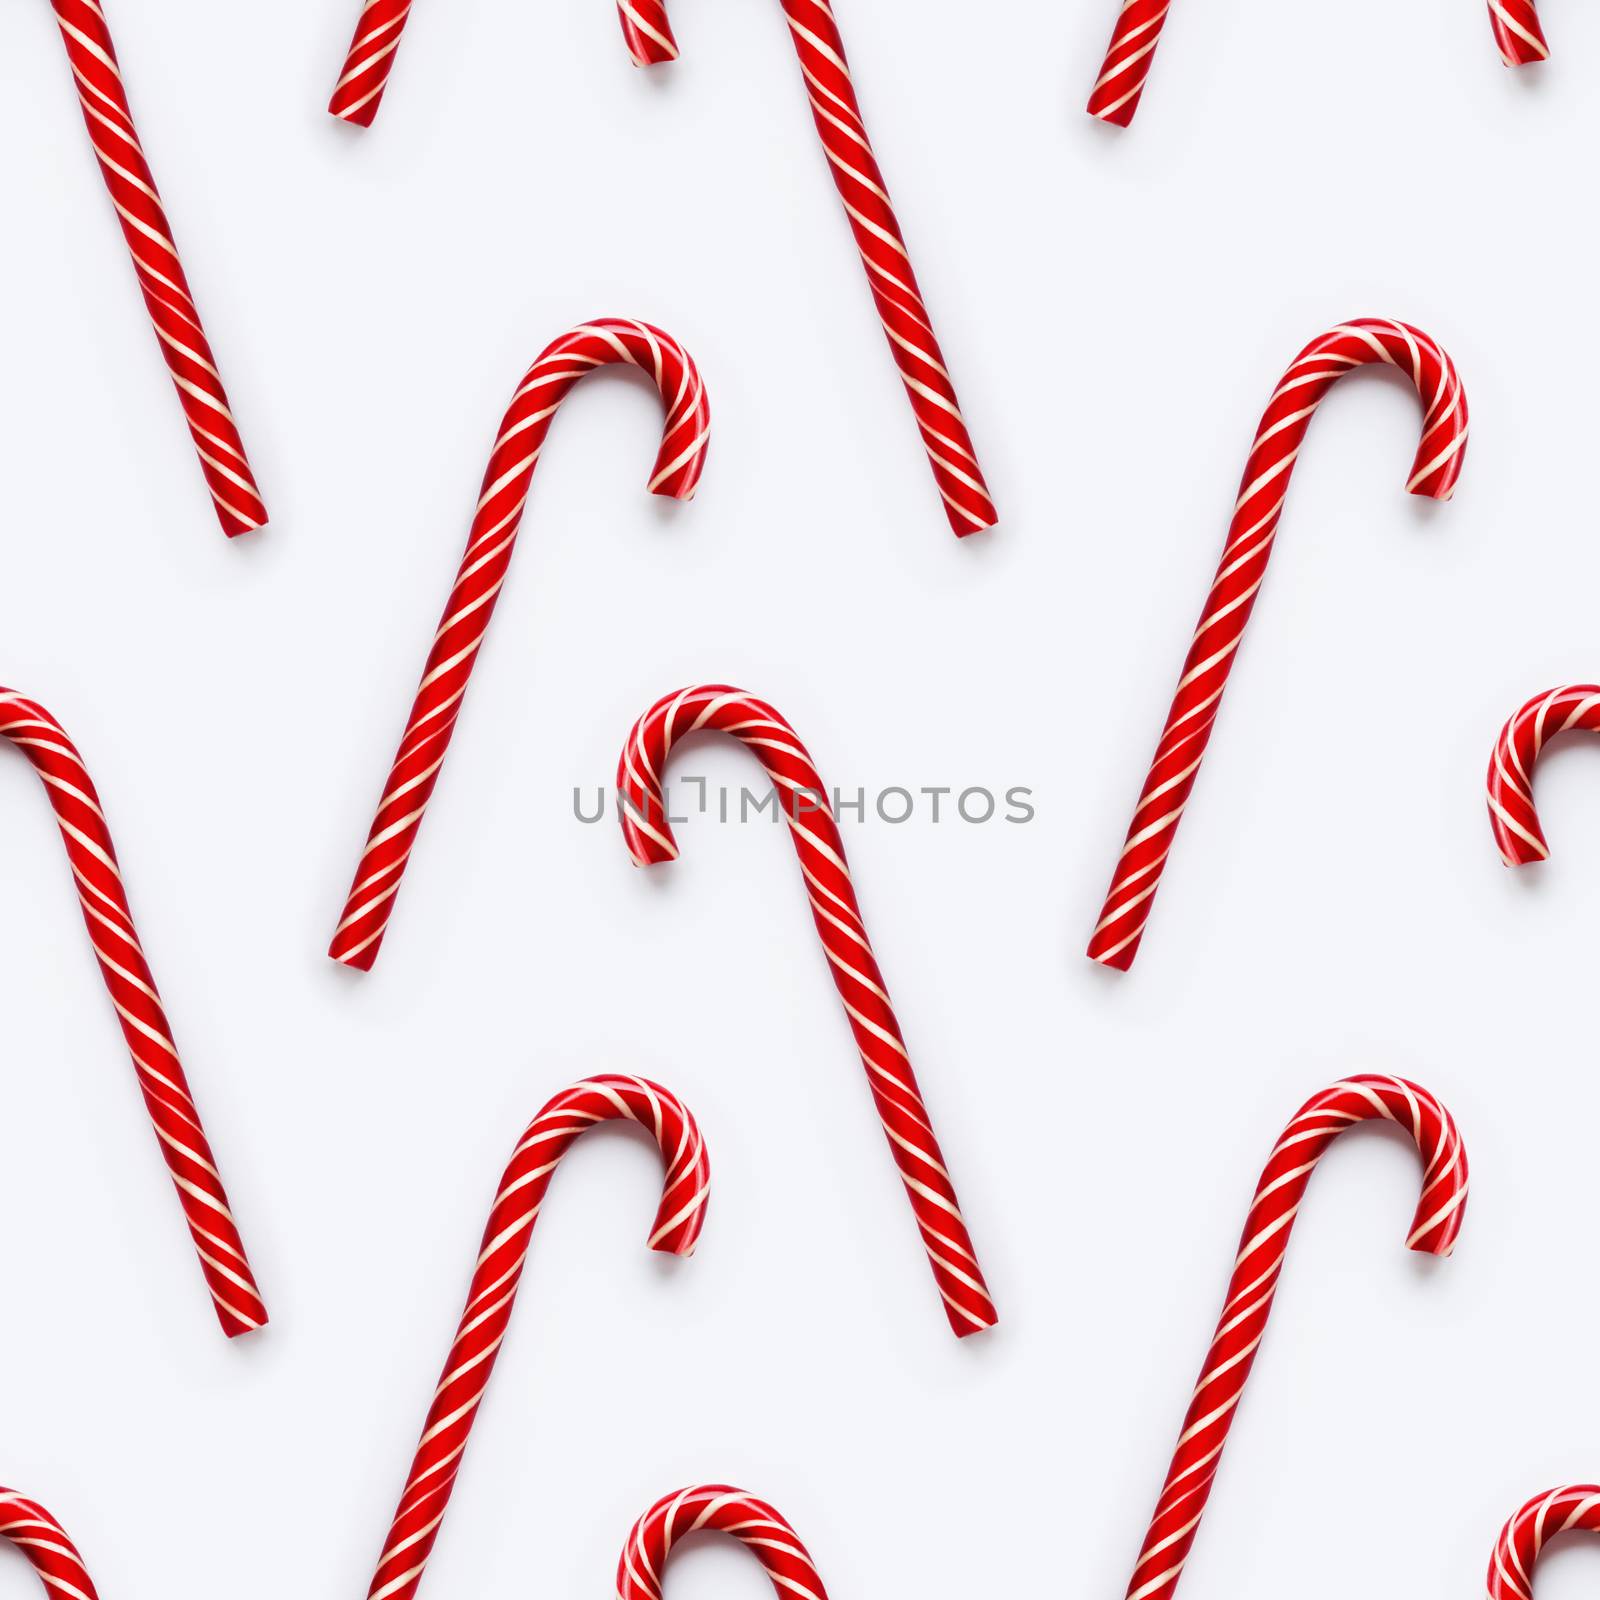 Seamless pattern of Christmas candy cone on white background. Colorful holiday sweet lollipop. Dessert wtih red and white stripes.